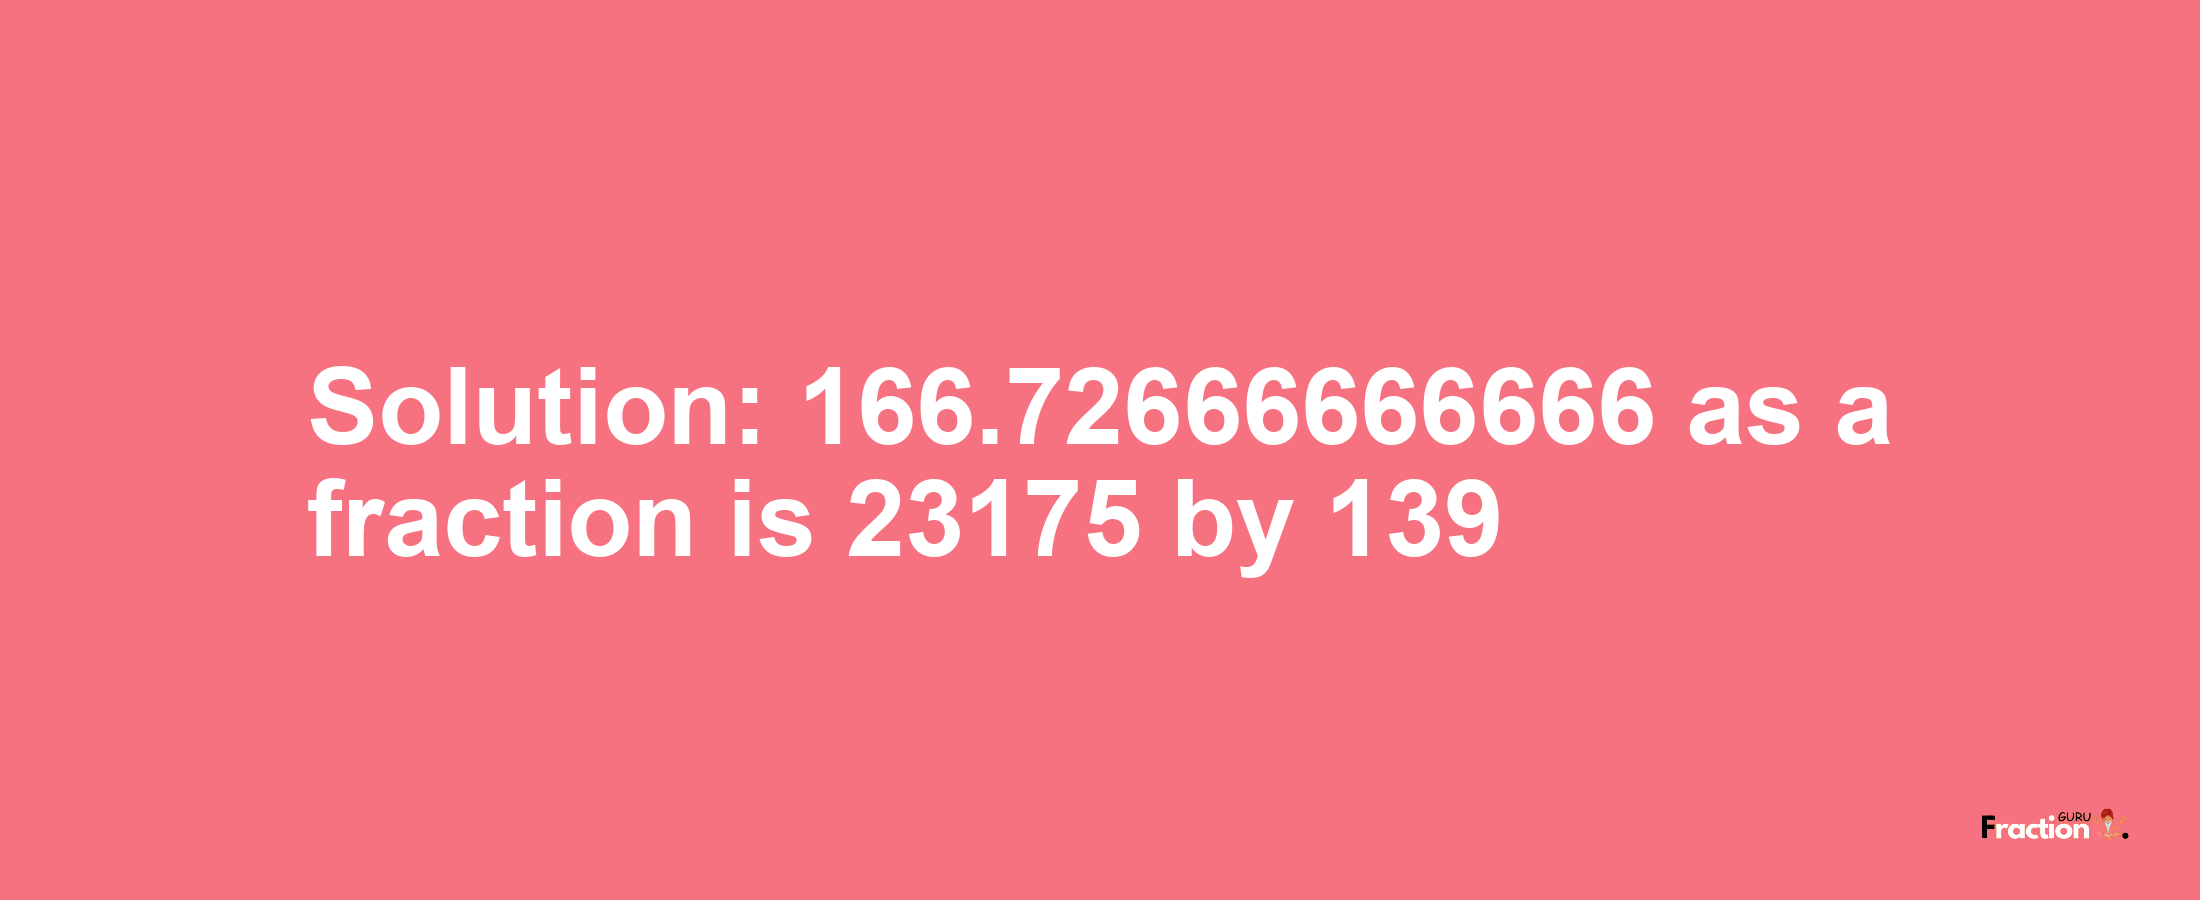 Solution:166.72666666666 as a fraction is 23175/139